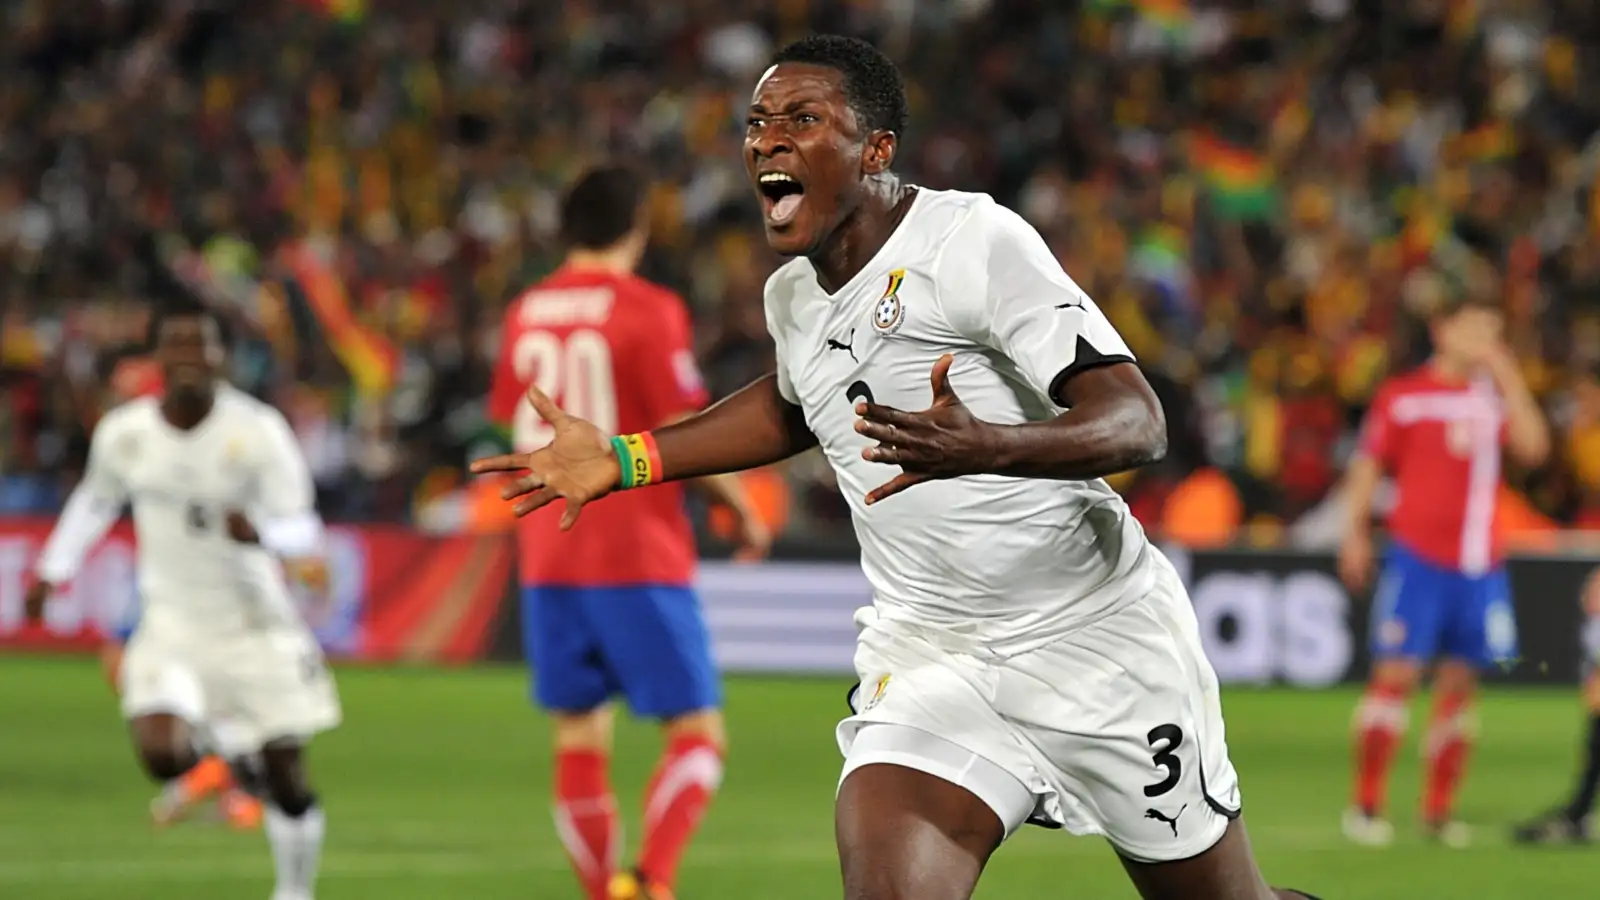 Asamoah Gyan: A career of heartbreak, controversy – and lots of goals